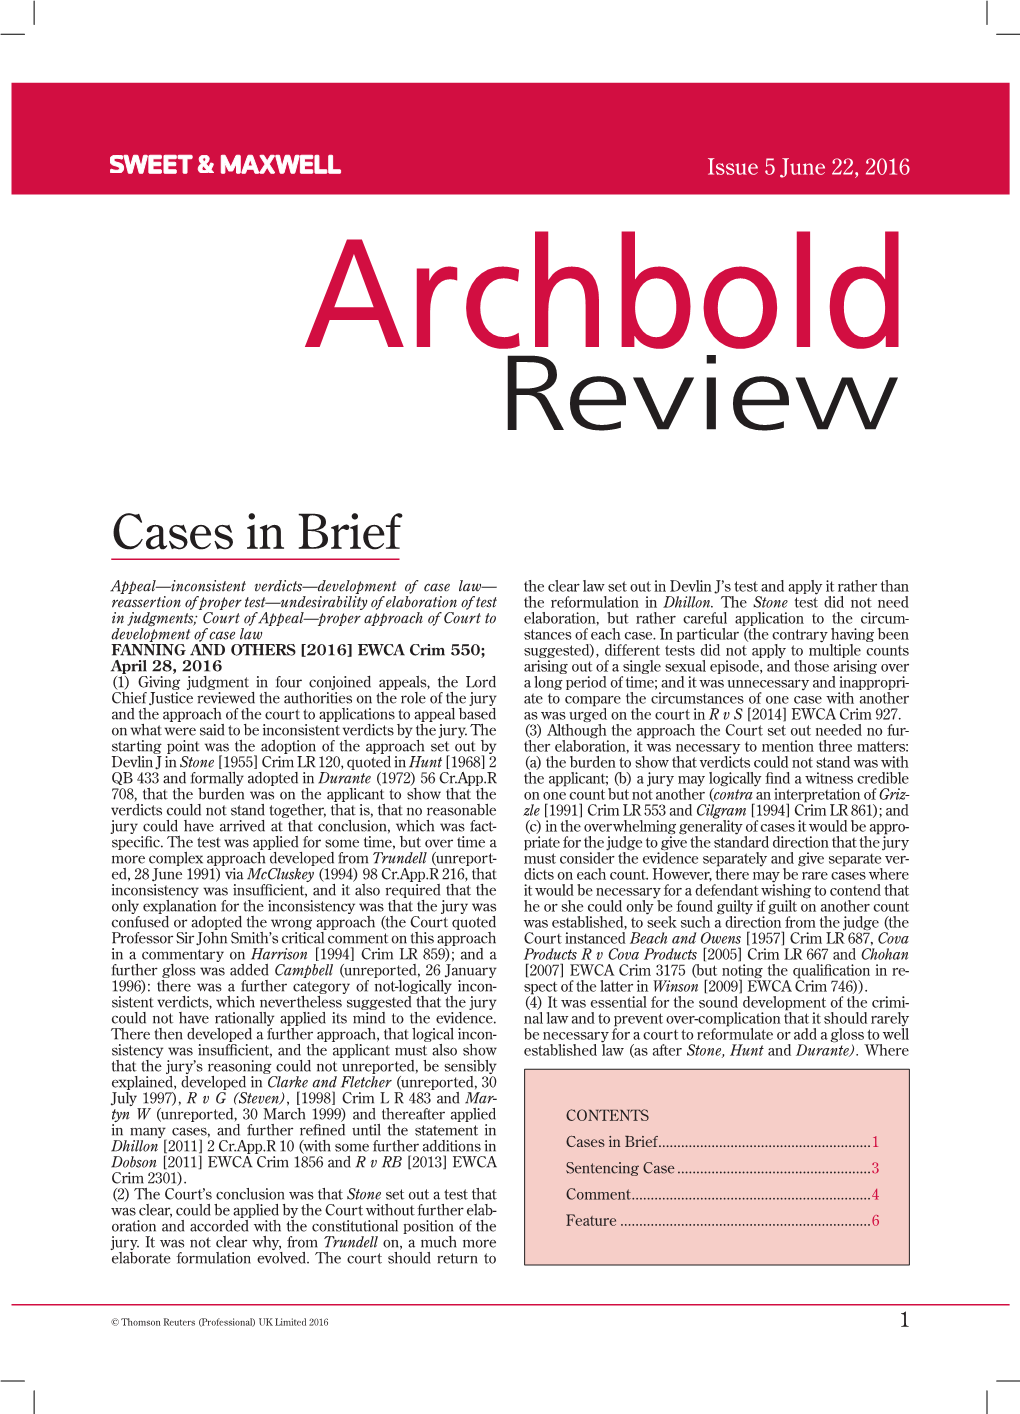 Archbold Review 5-6, and the News Pieces of EU Legislation in the Area of Justice and Home Item, [2016] 2 Archbold Review 9